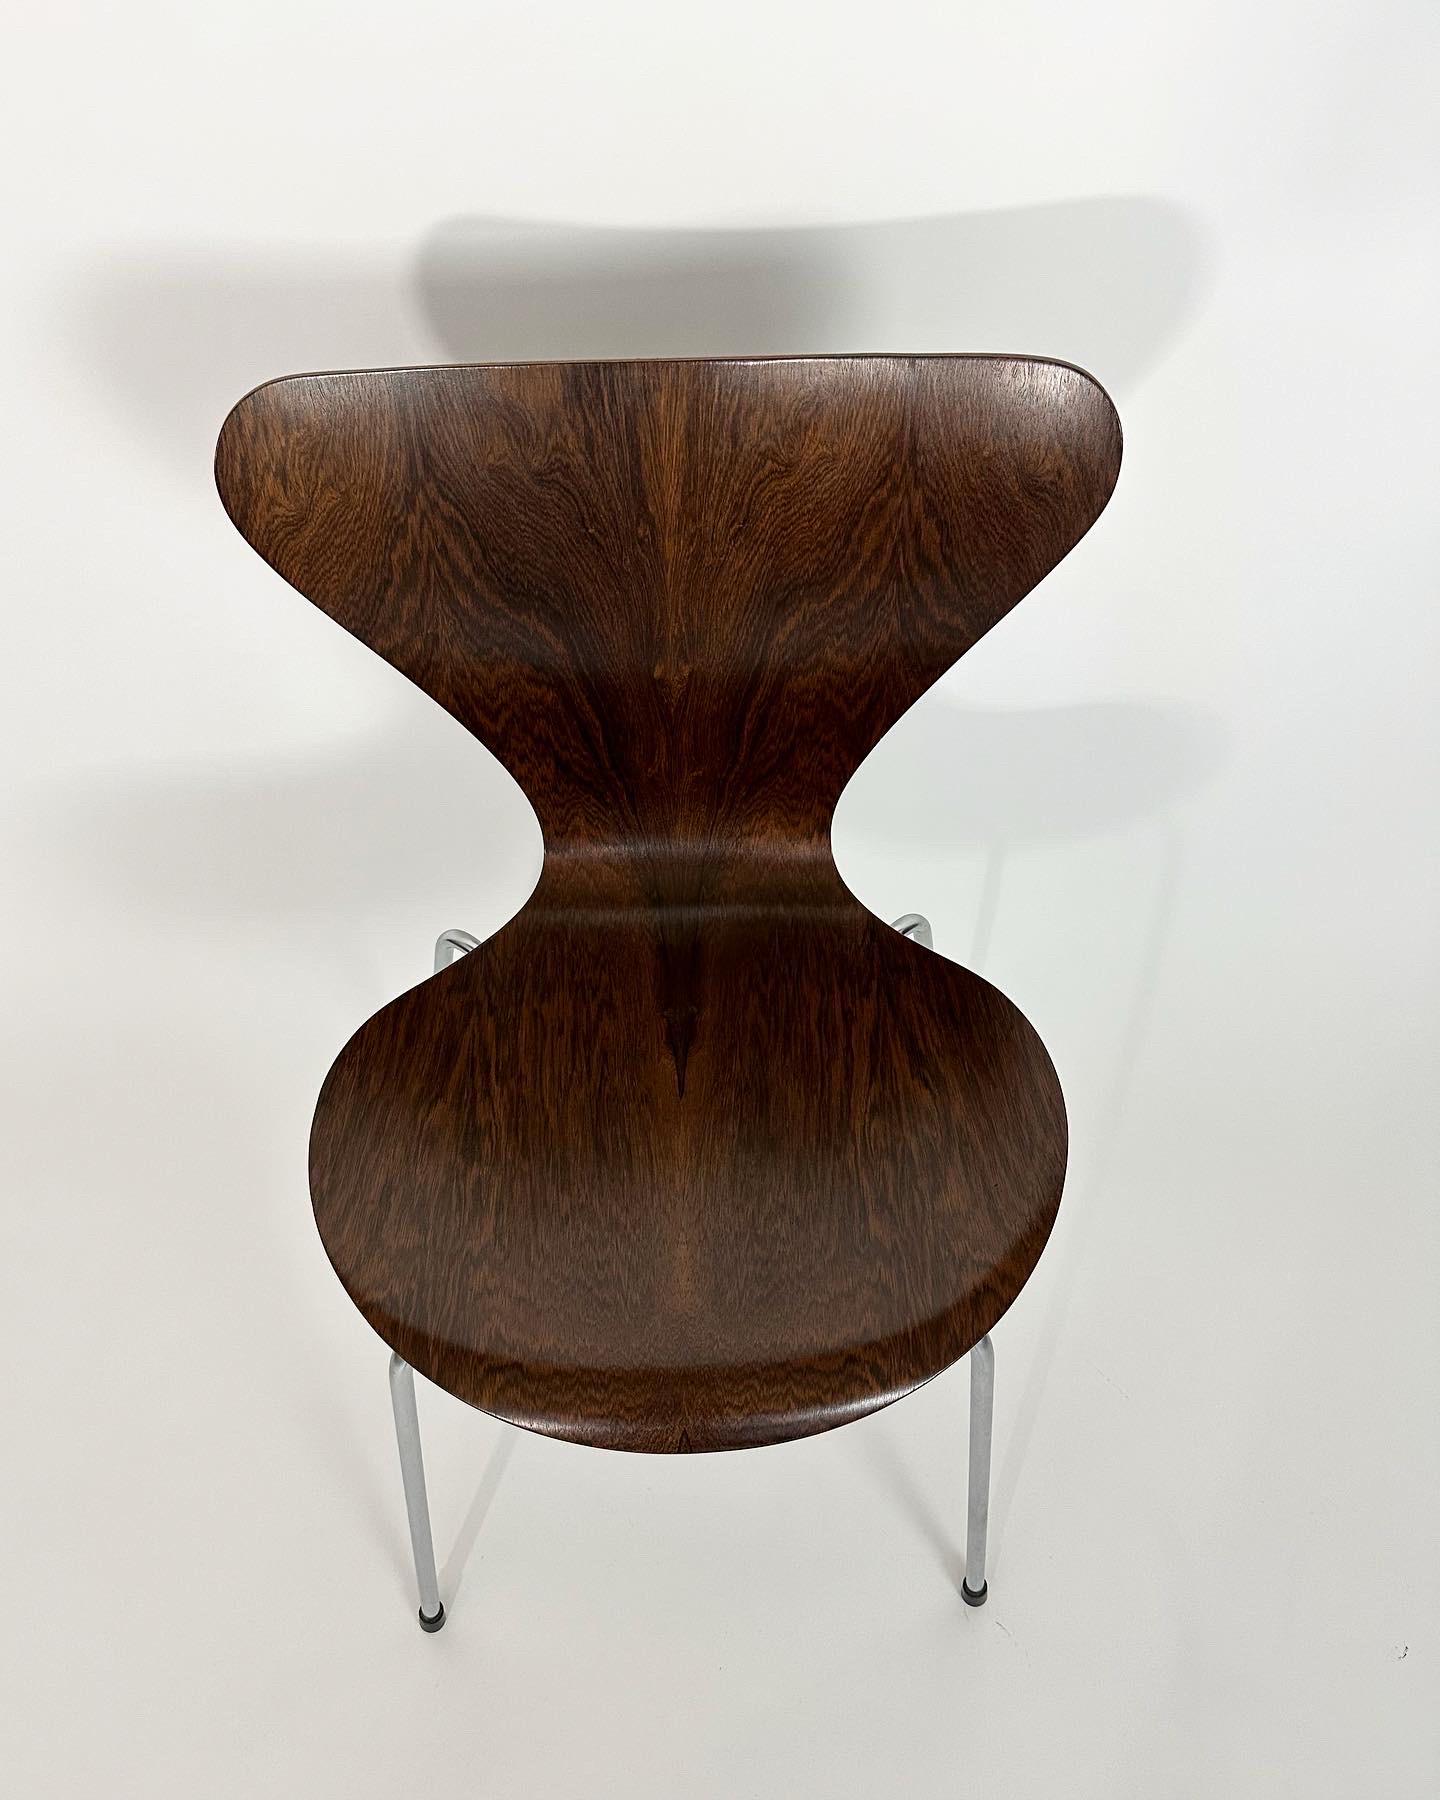 Rare Arne Jacobsen ‚Series 7’ rosewood chair, model No. 3107 for Fritz Hansen, produced in 1968.

Made of moulded rosewood plywood with a wonderful strong grained veneer, steel base with black gliders. 

Very good condition, the backrest is